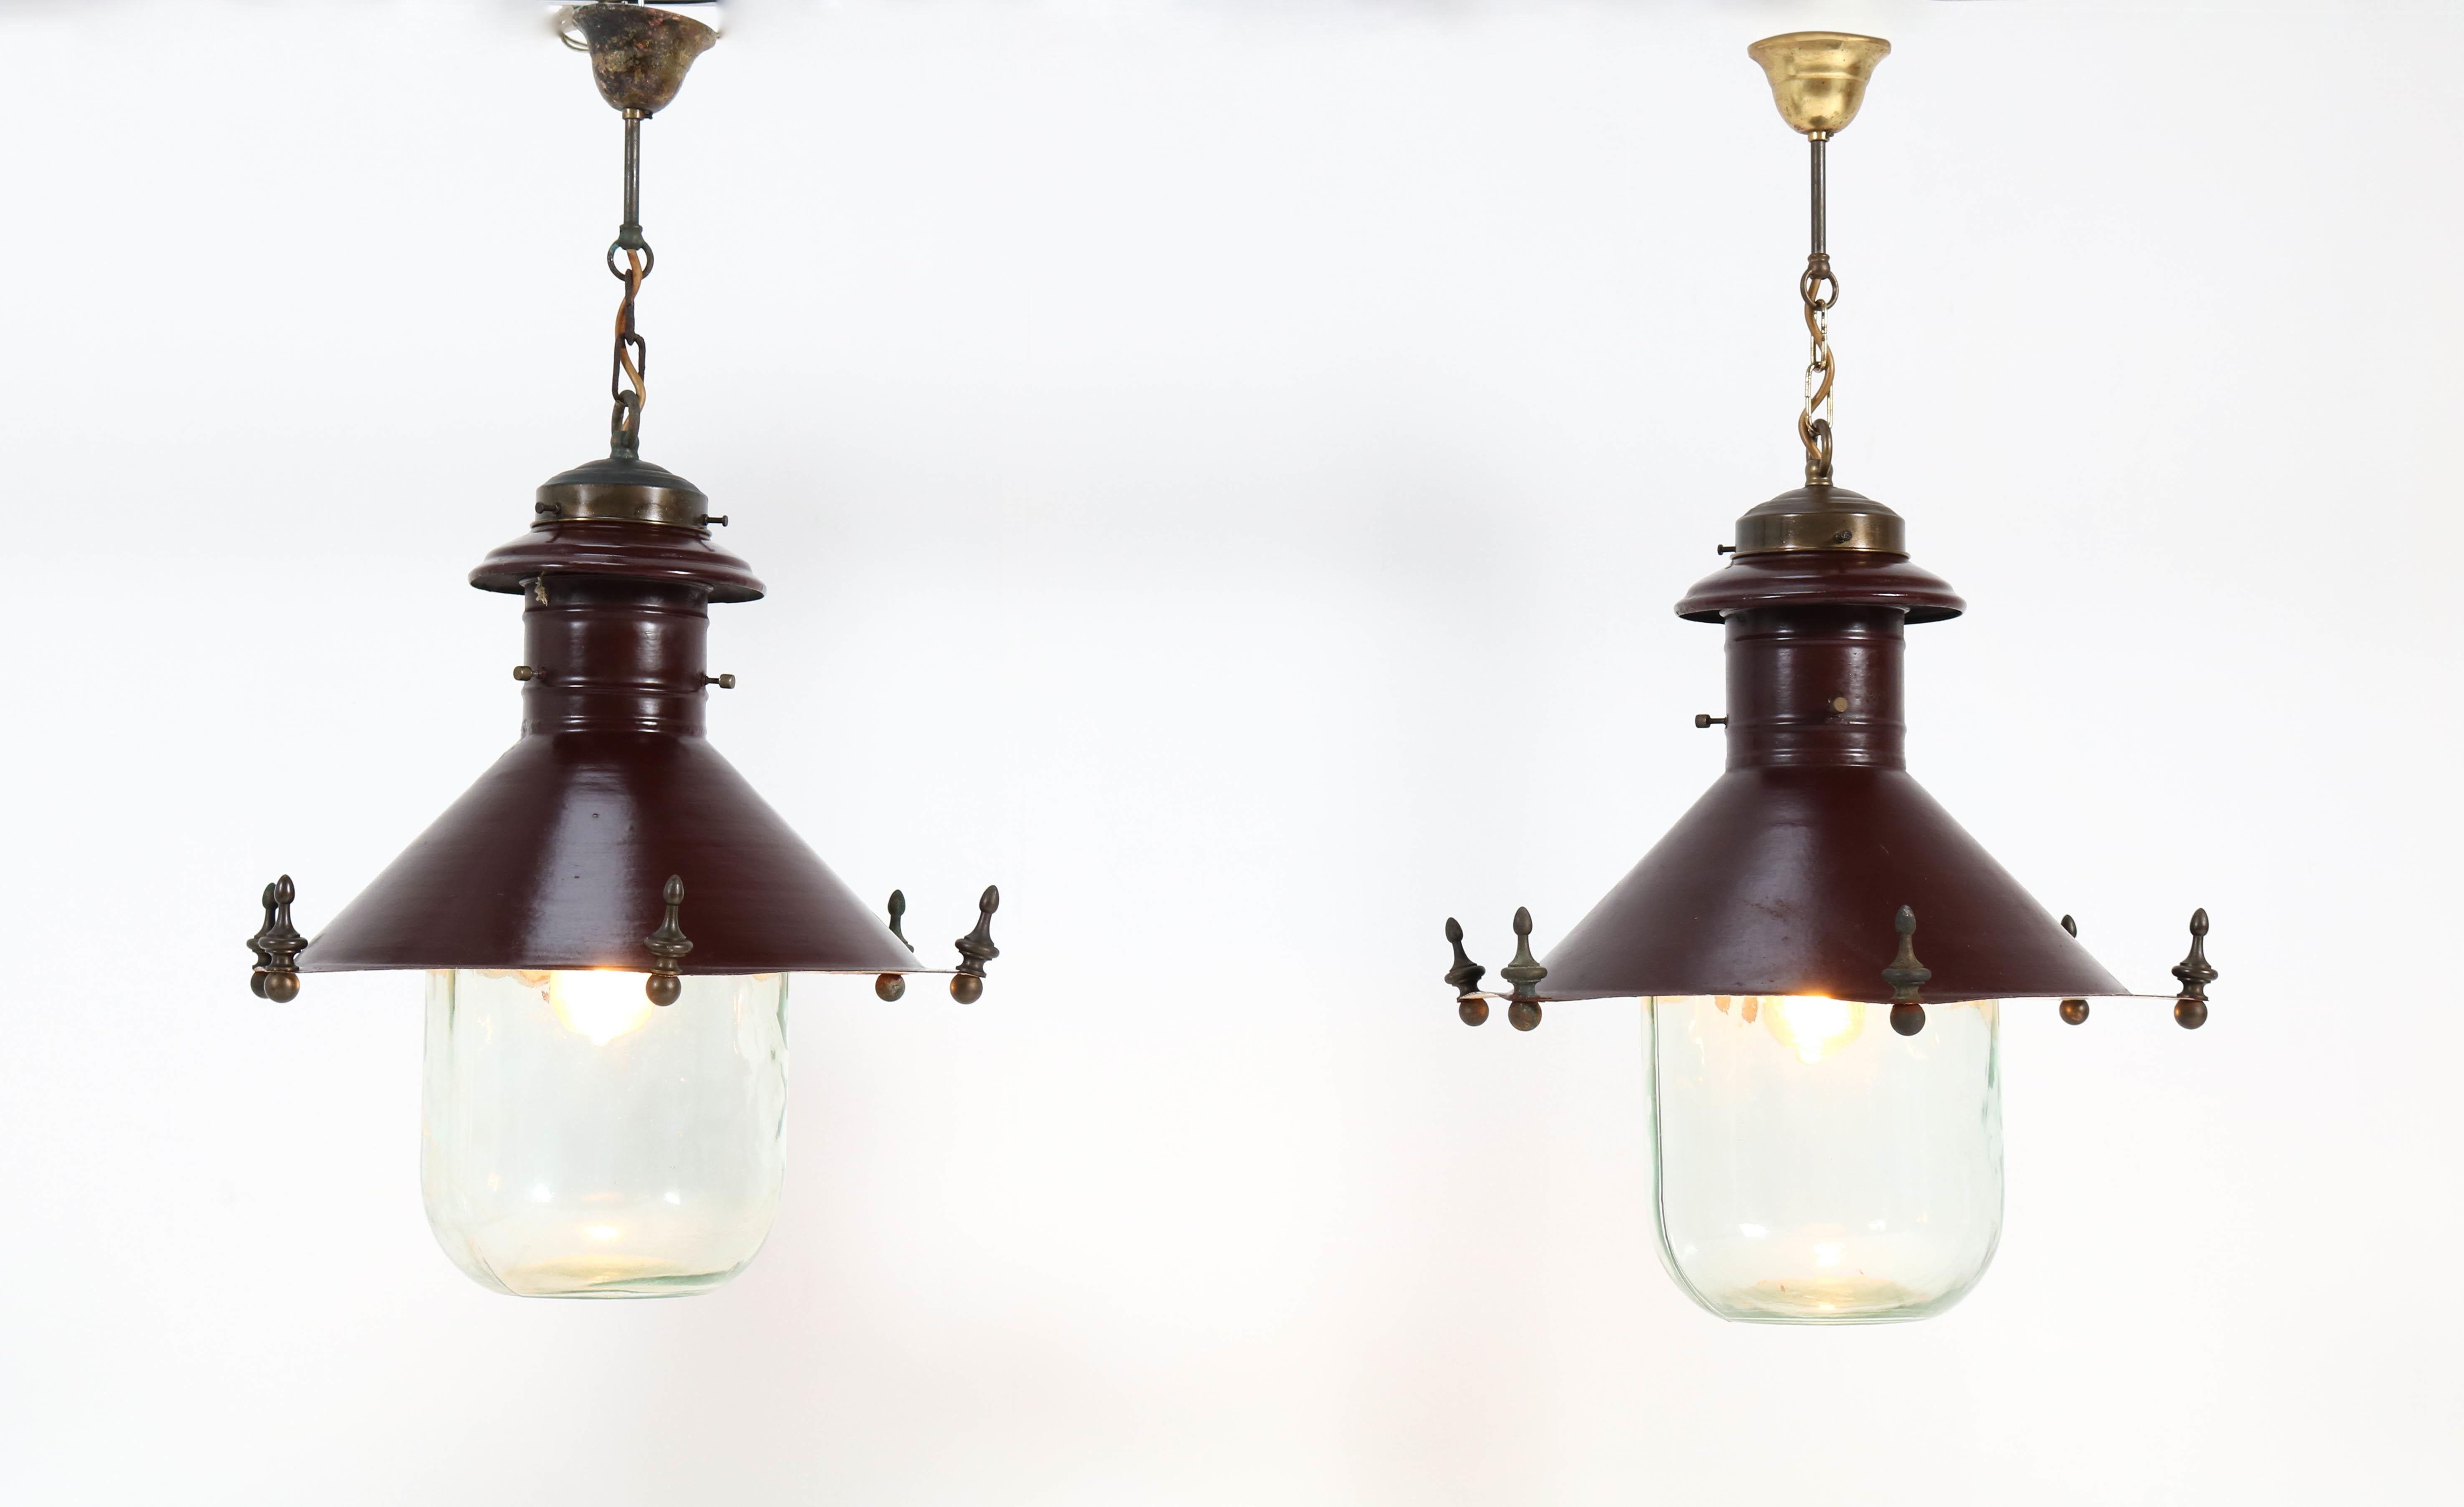 Lacquered Pair of Art Deco Industrial Lanterns with Original Glass Shades, 1930s